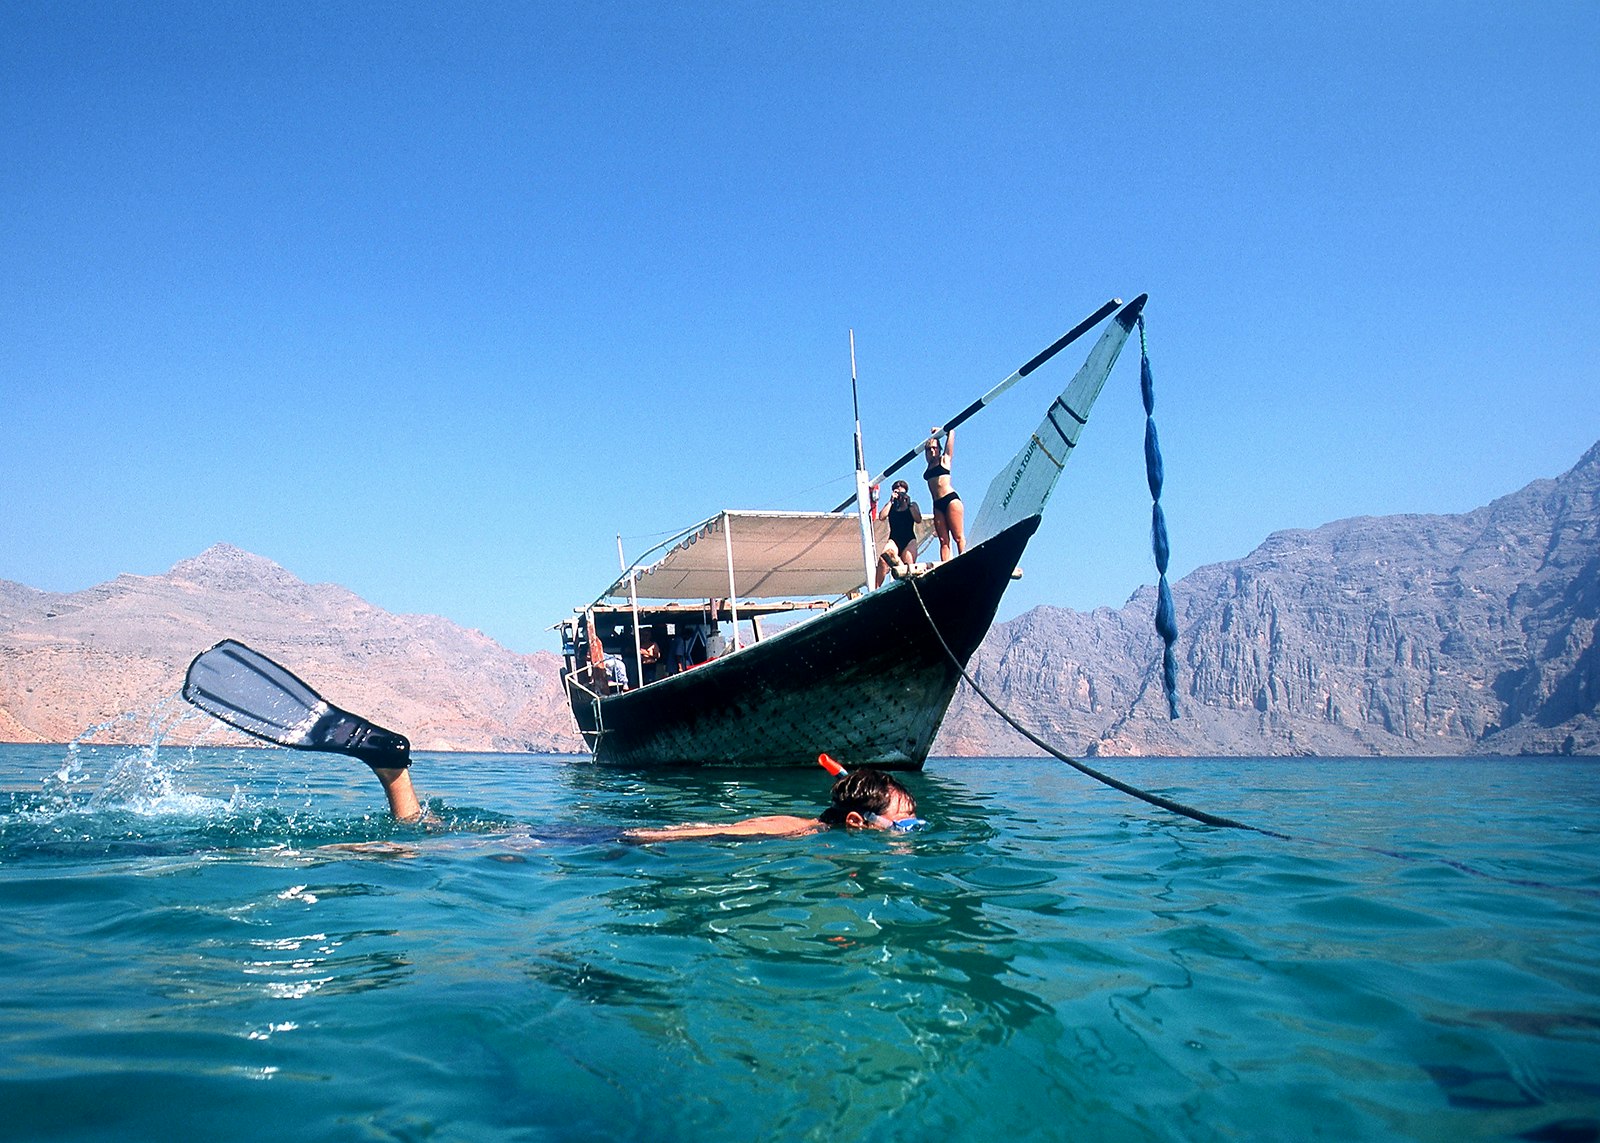 Tourists swimming in the jade waters of the Musandam Peninsula, Oman © Jochen Tack / Getty Images